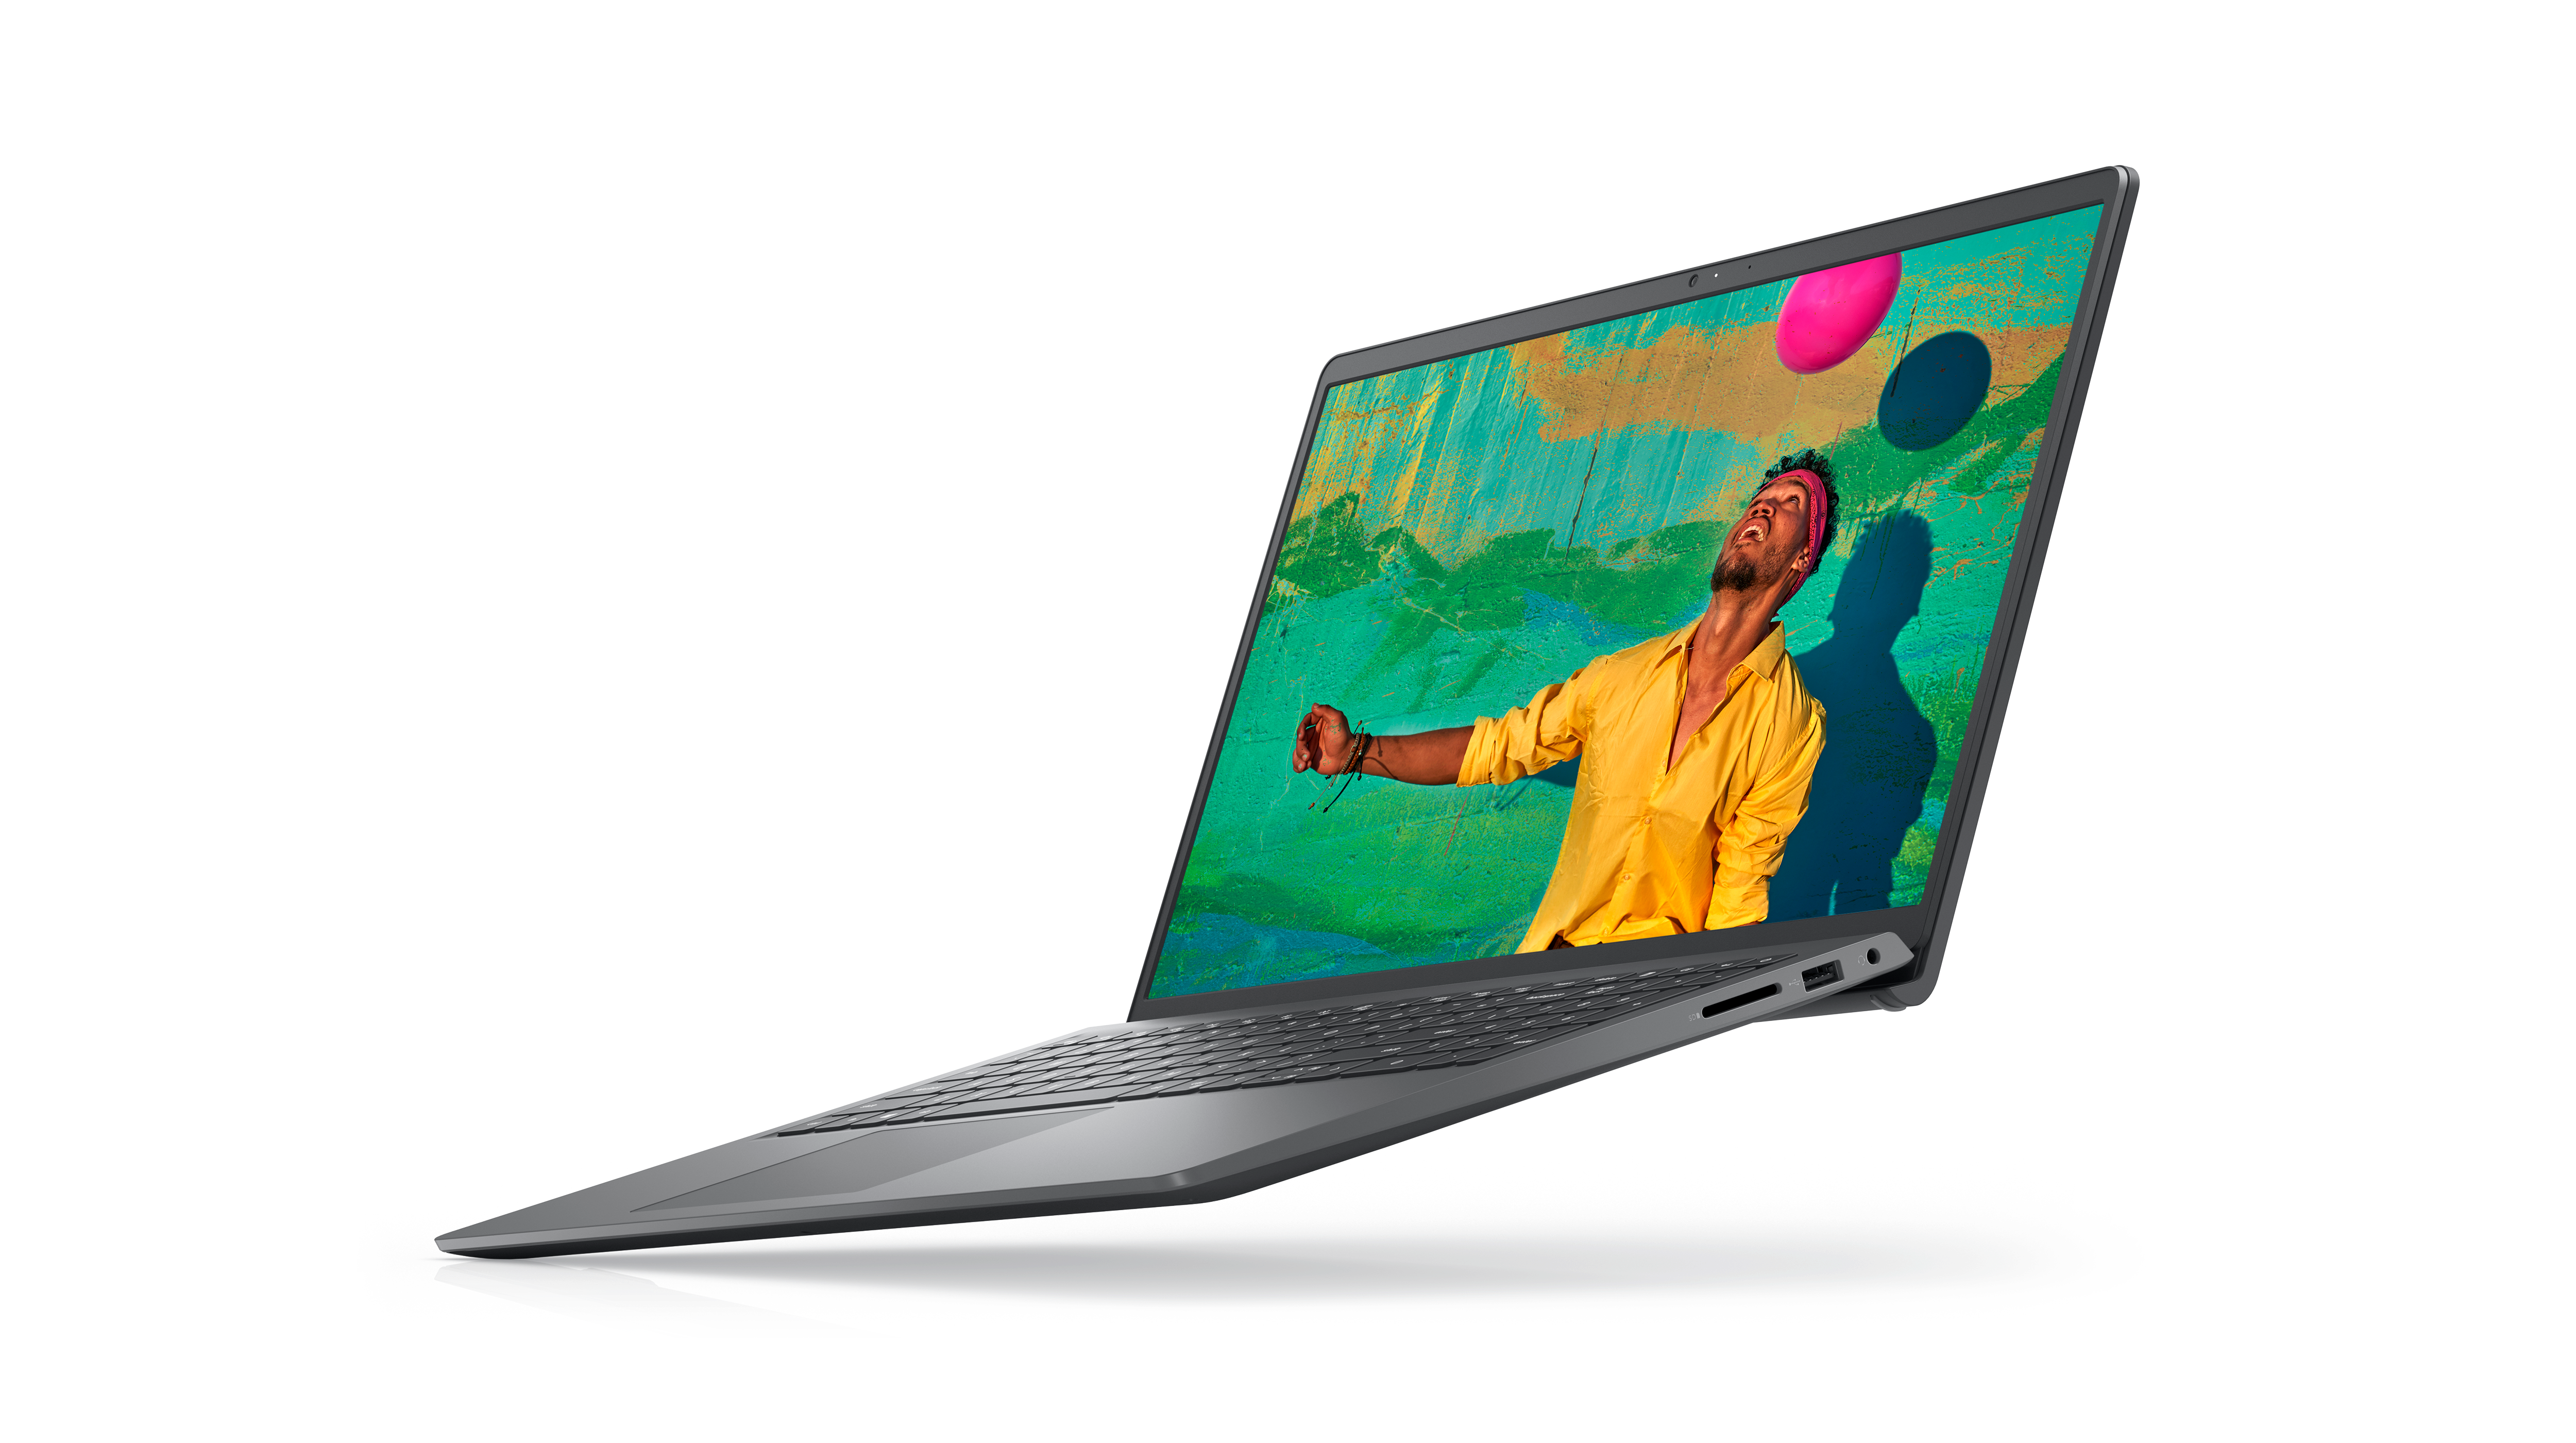 Picture of a Dell Inspiron 15 3520 Laptop with a smiley man wearing a yellow shirt staring a pink ball above his head.